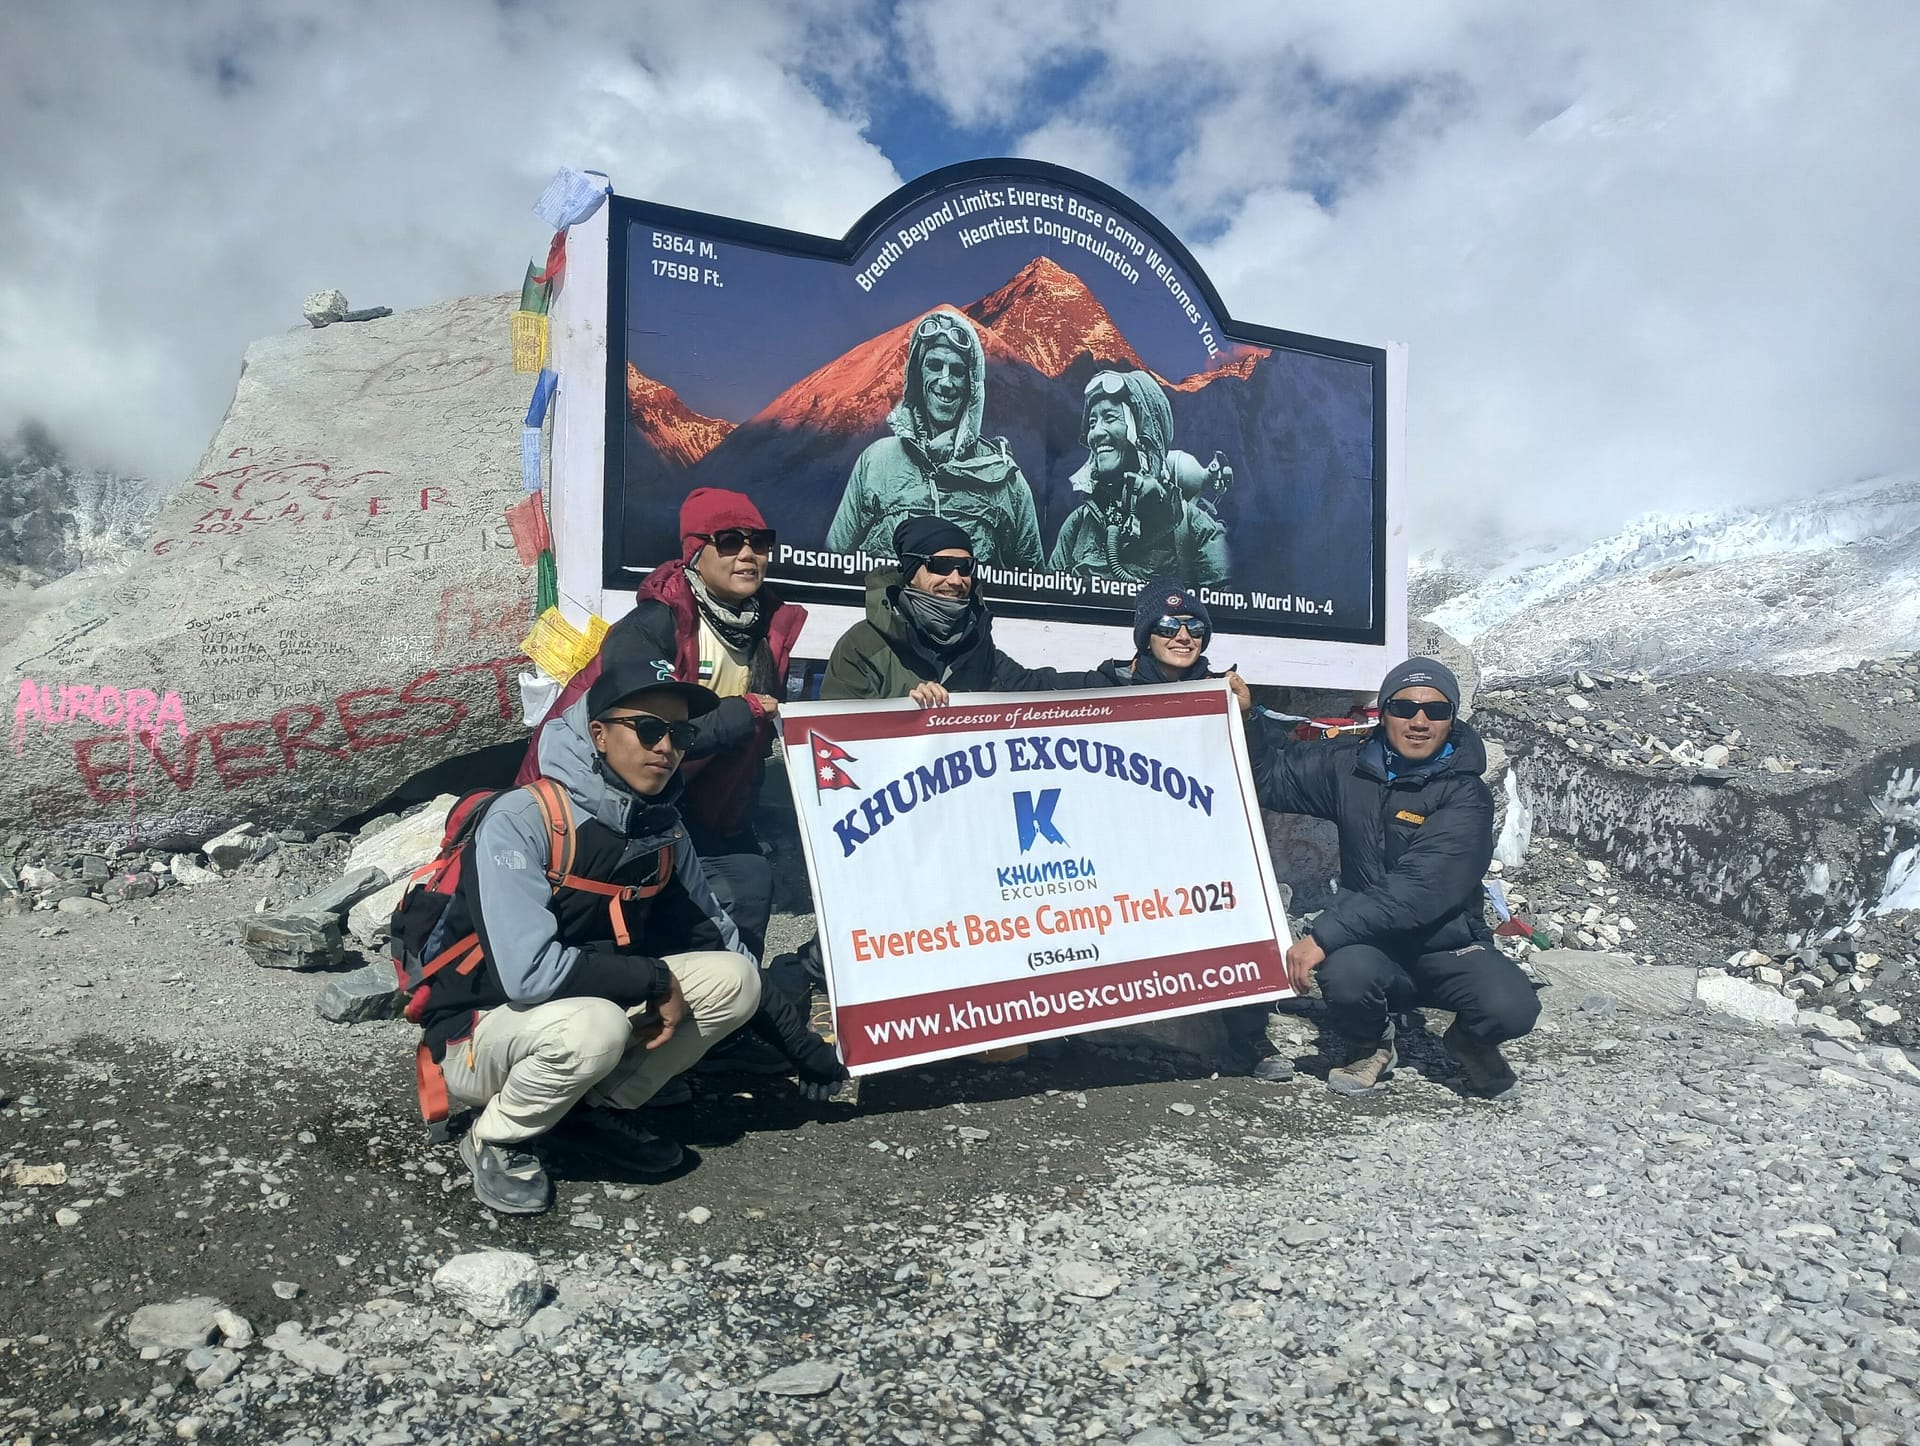 "Khumbu Excursion's journey to Everest Base Camp follows the establishment of the new border in the area."